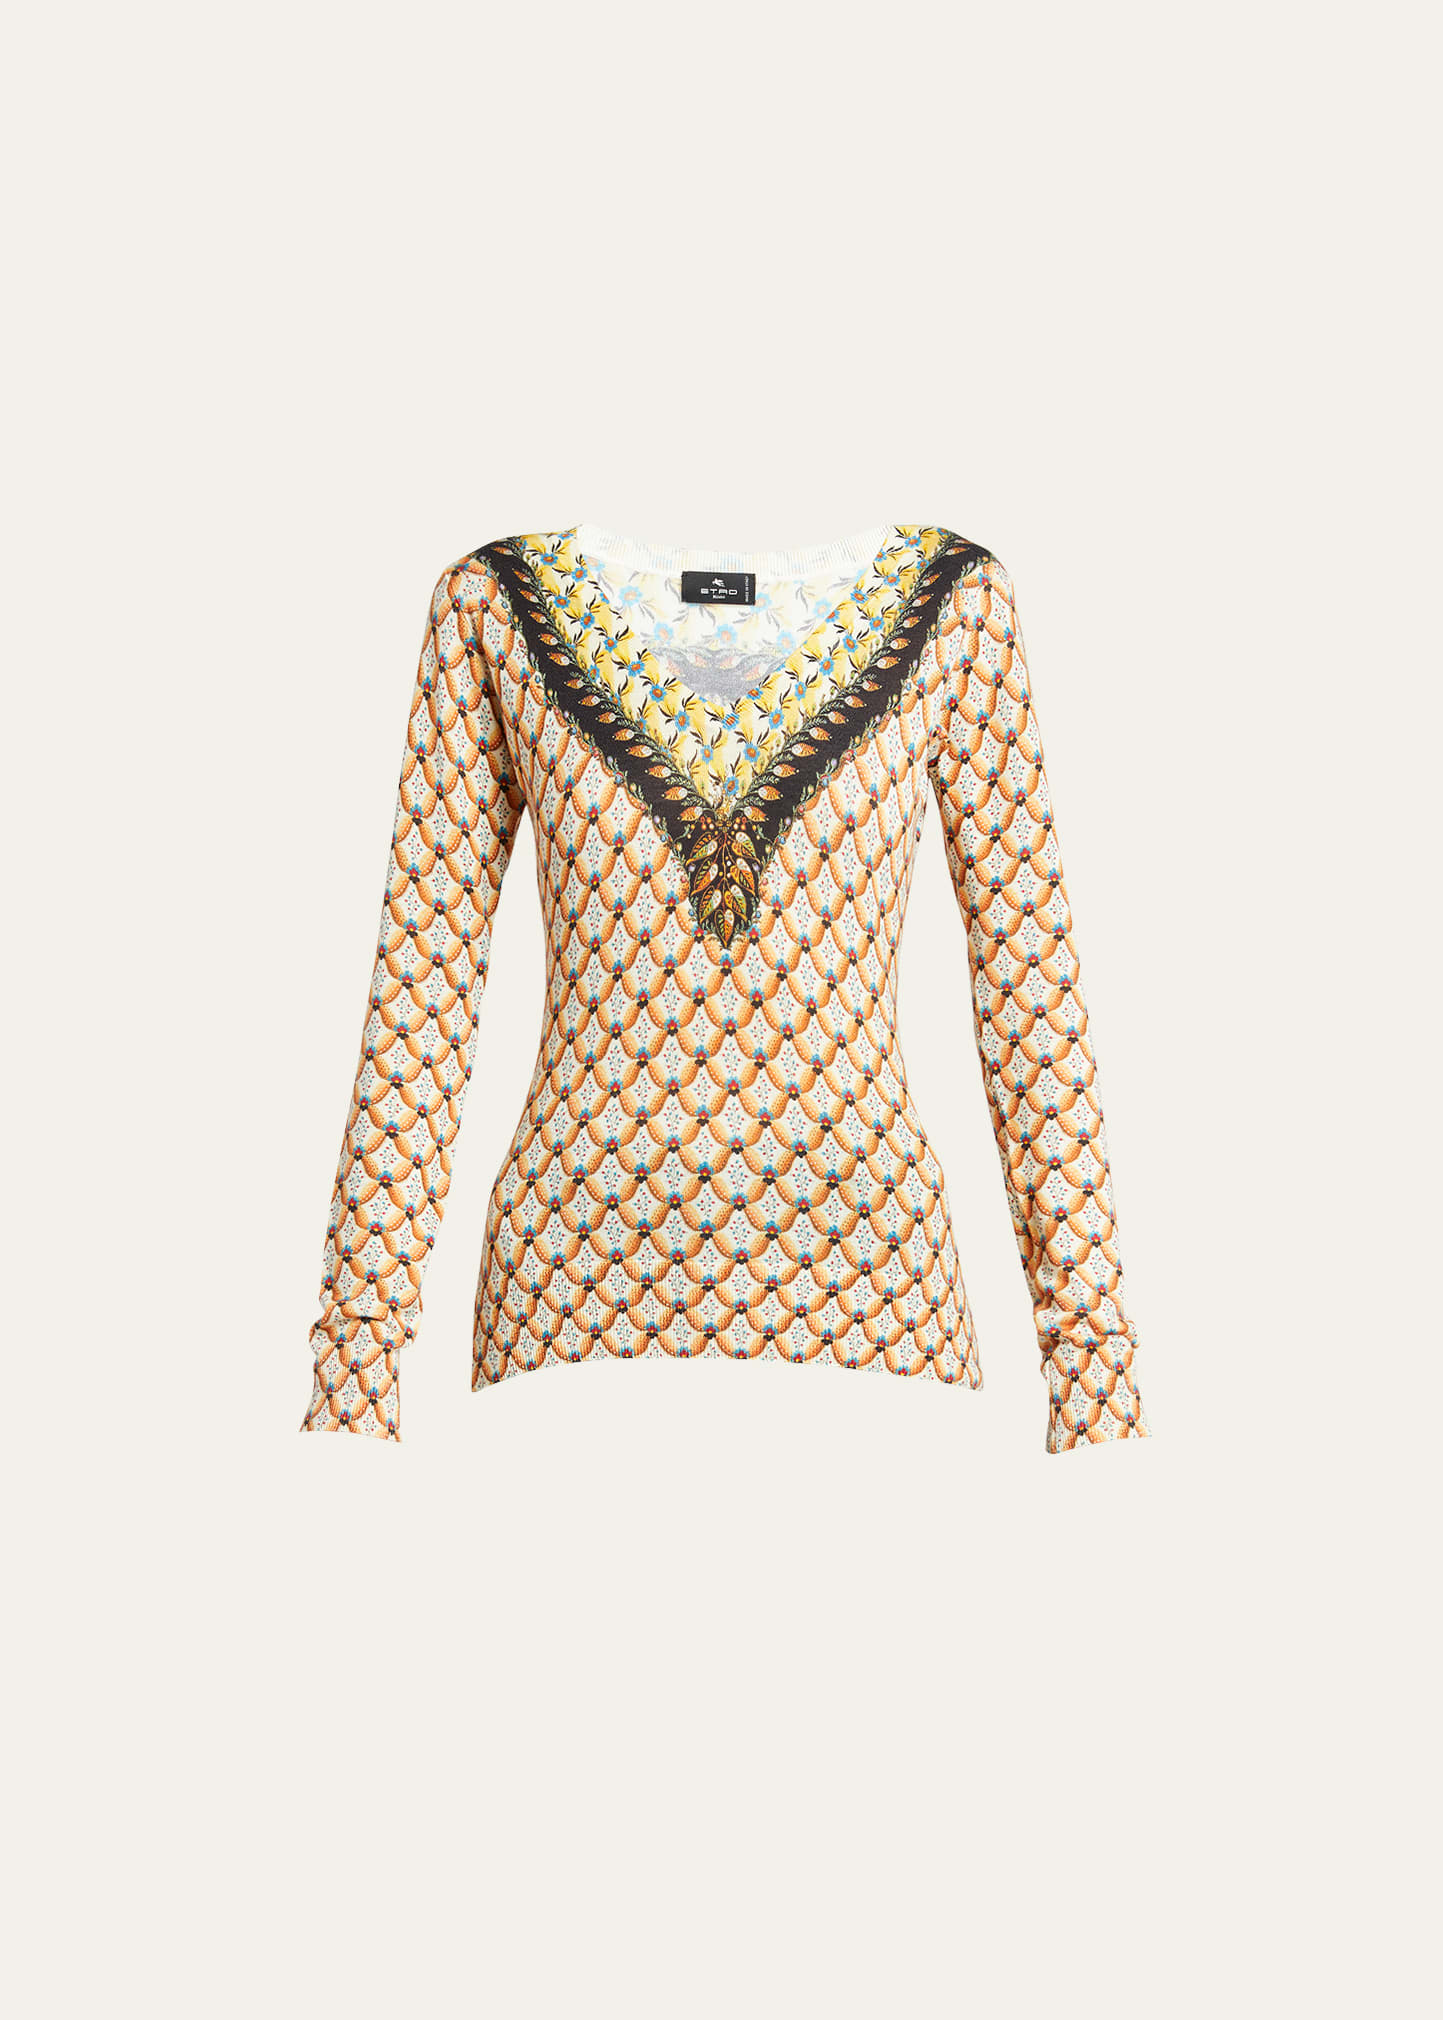 ETRO CASHMERE MICRO-FLORAL KNIT TOP